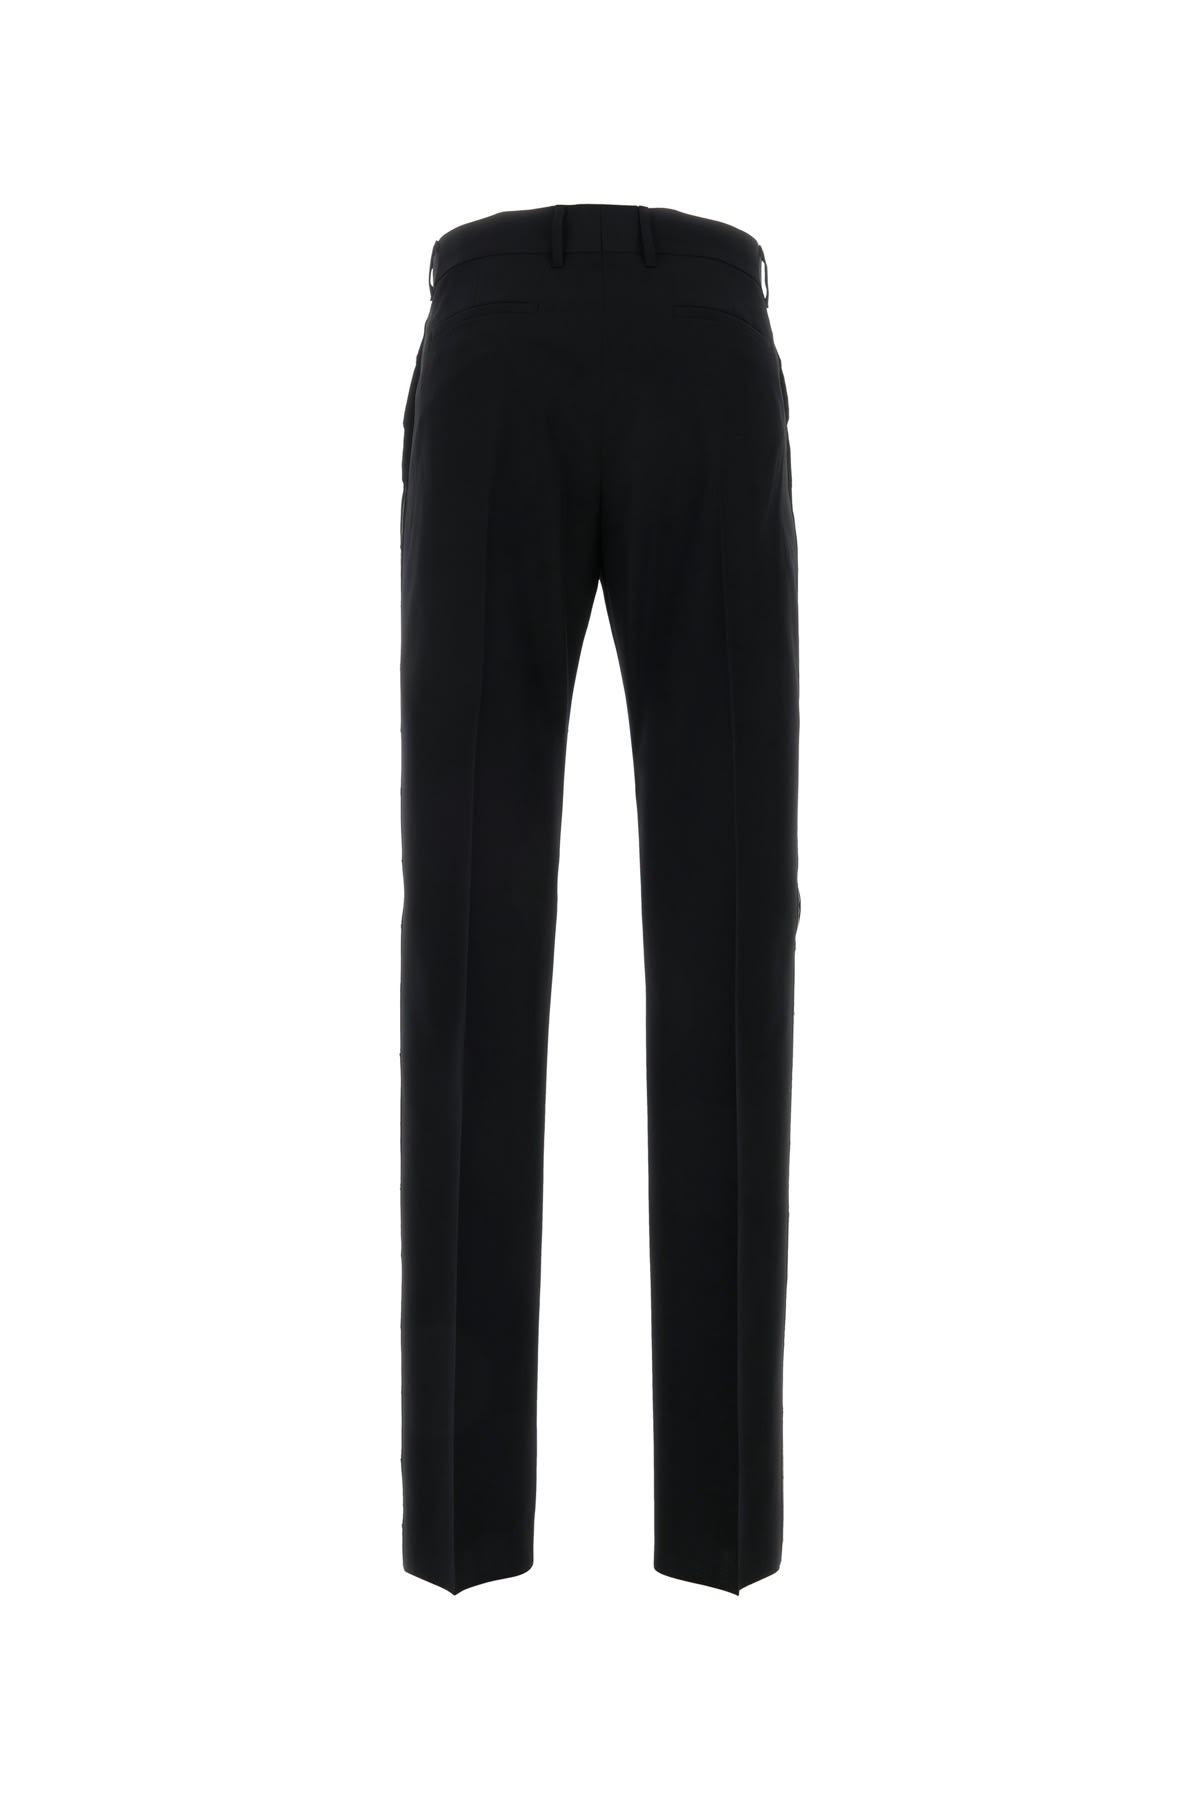 Givenchy Black Twill Trouser